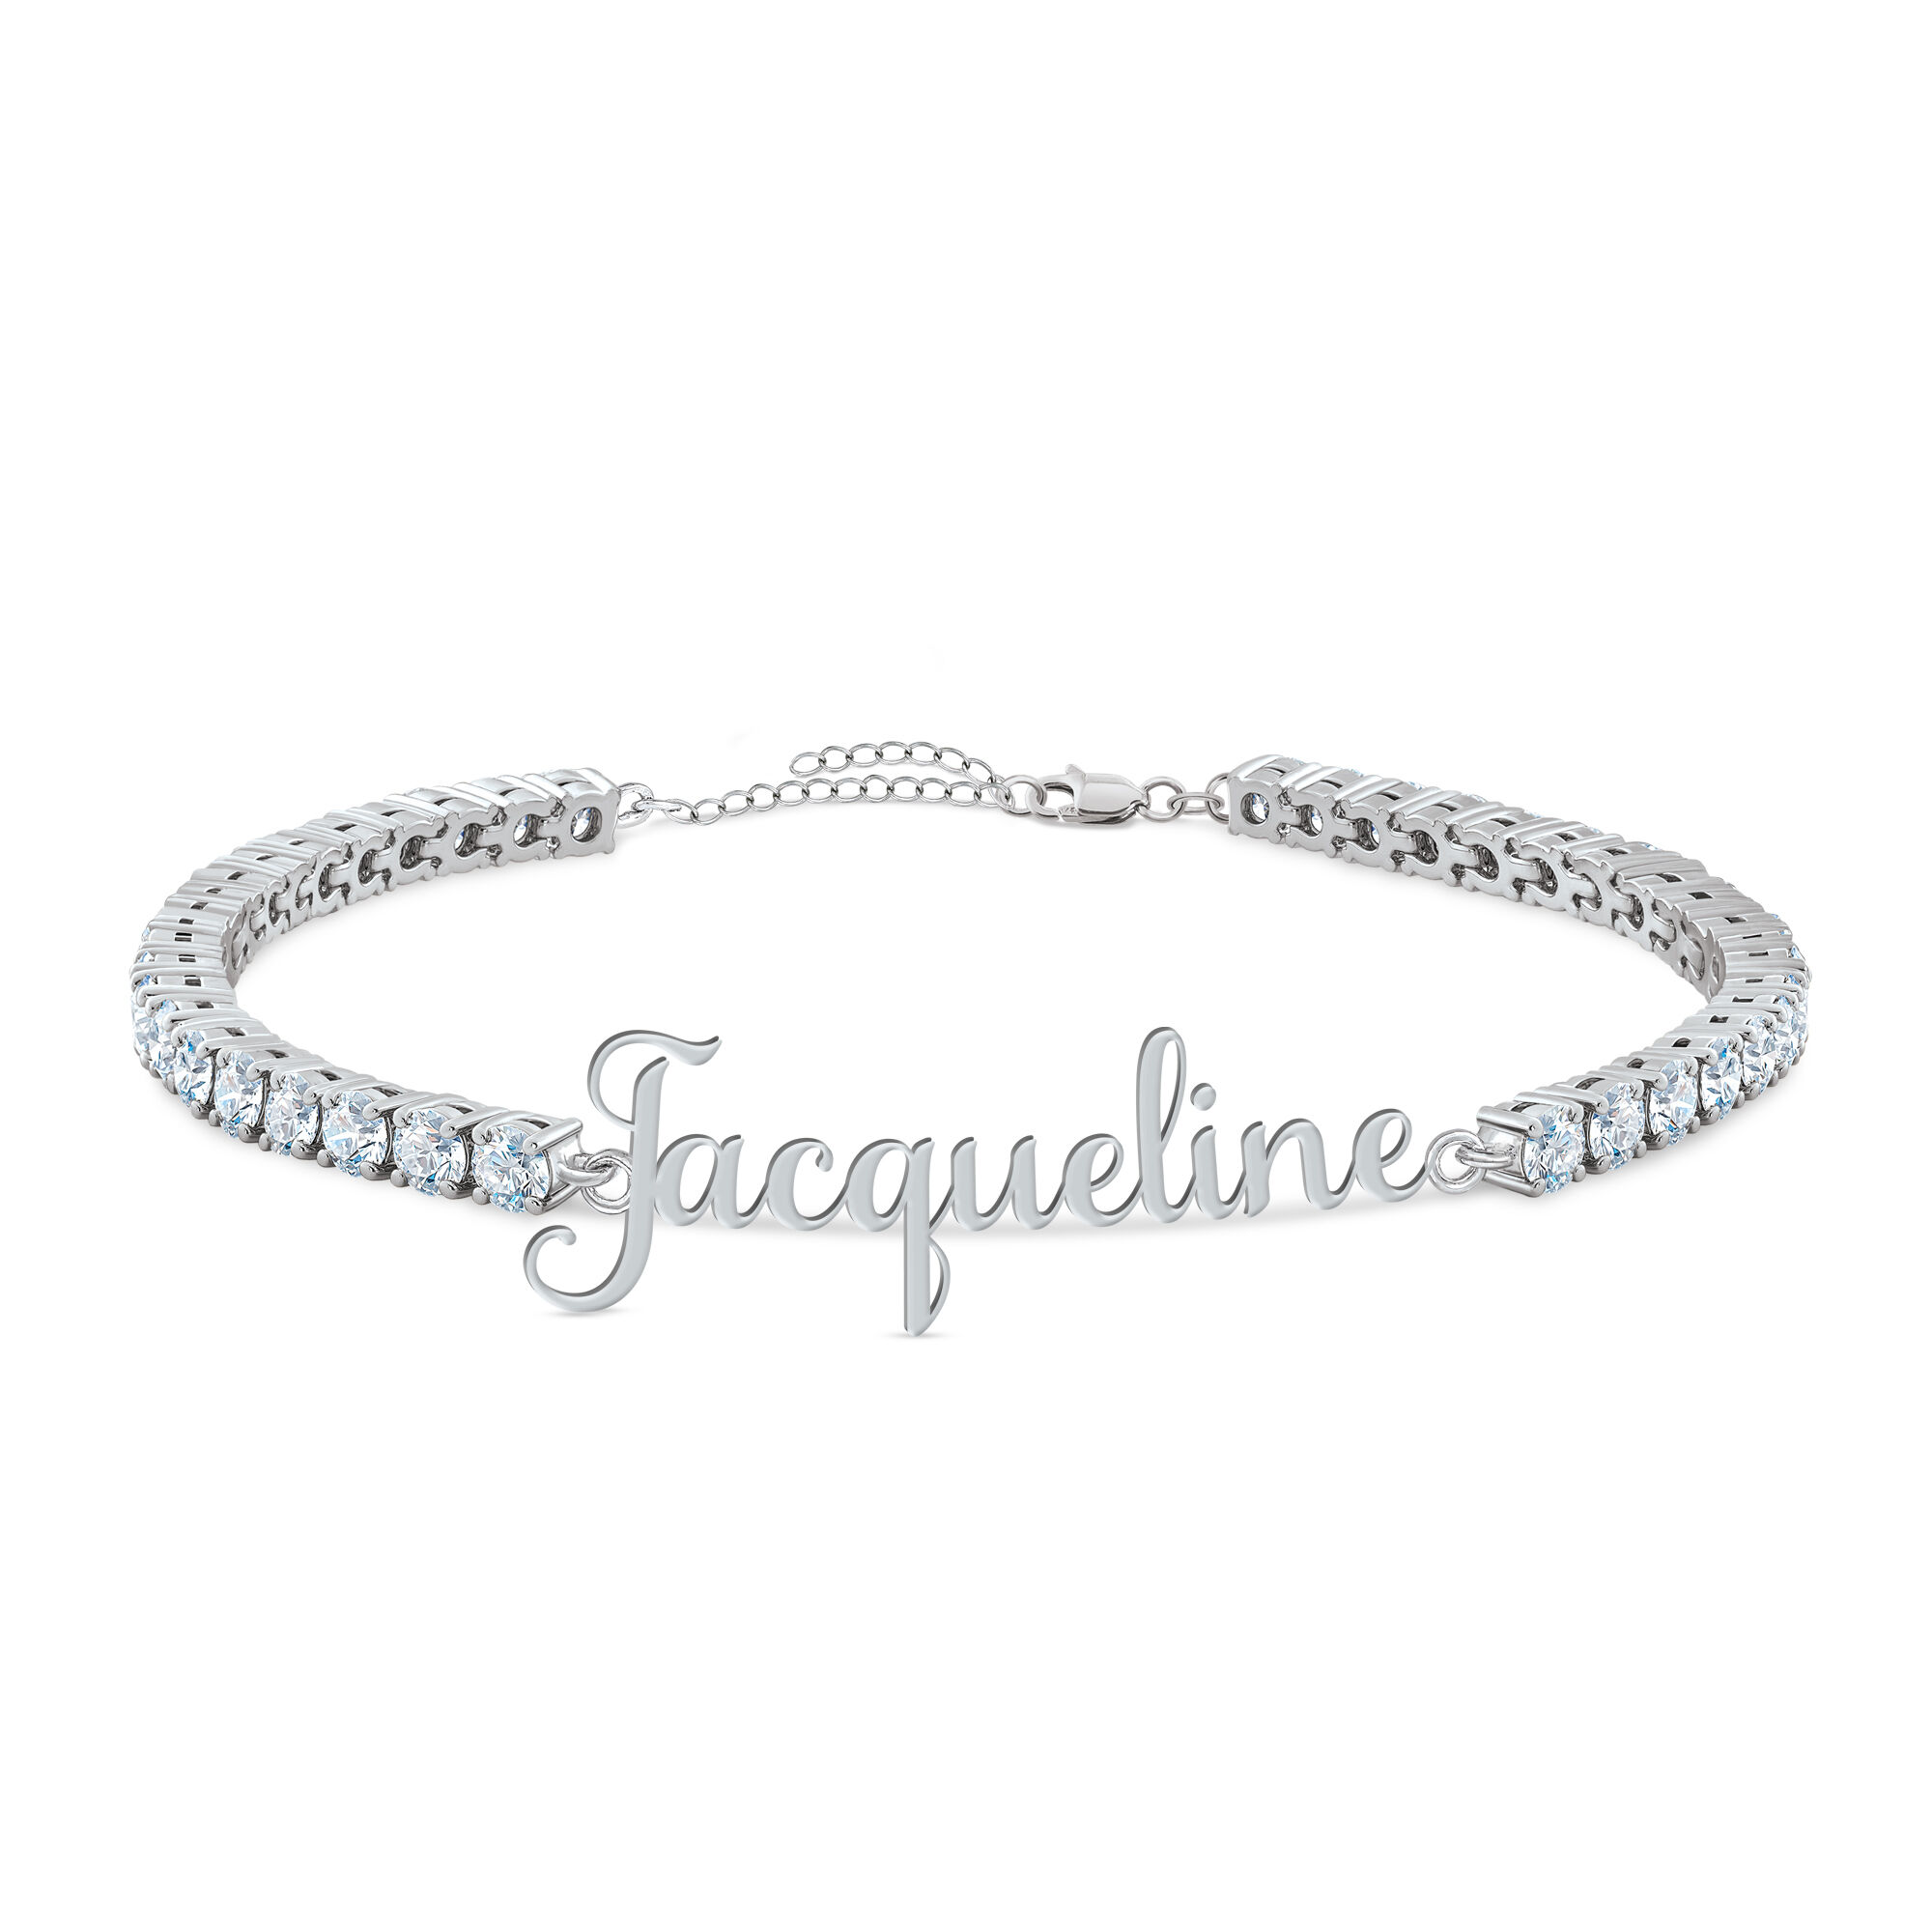 Personalized Shimmering Tennis Bracelet 6571 0014 a main